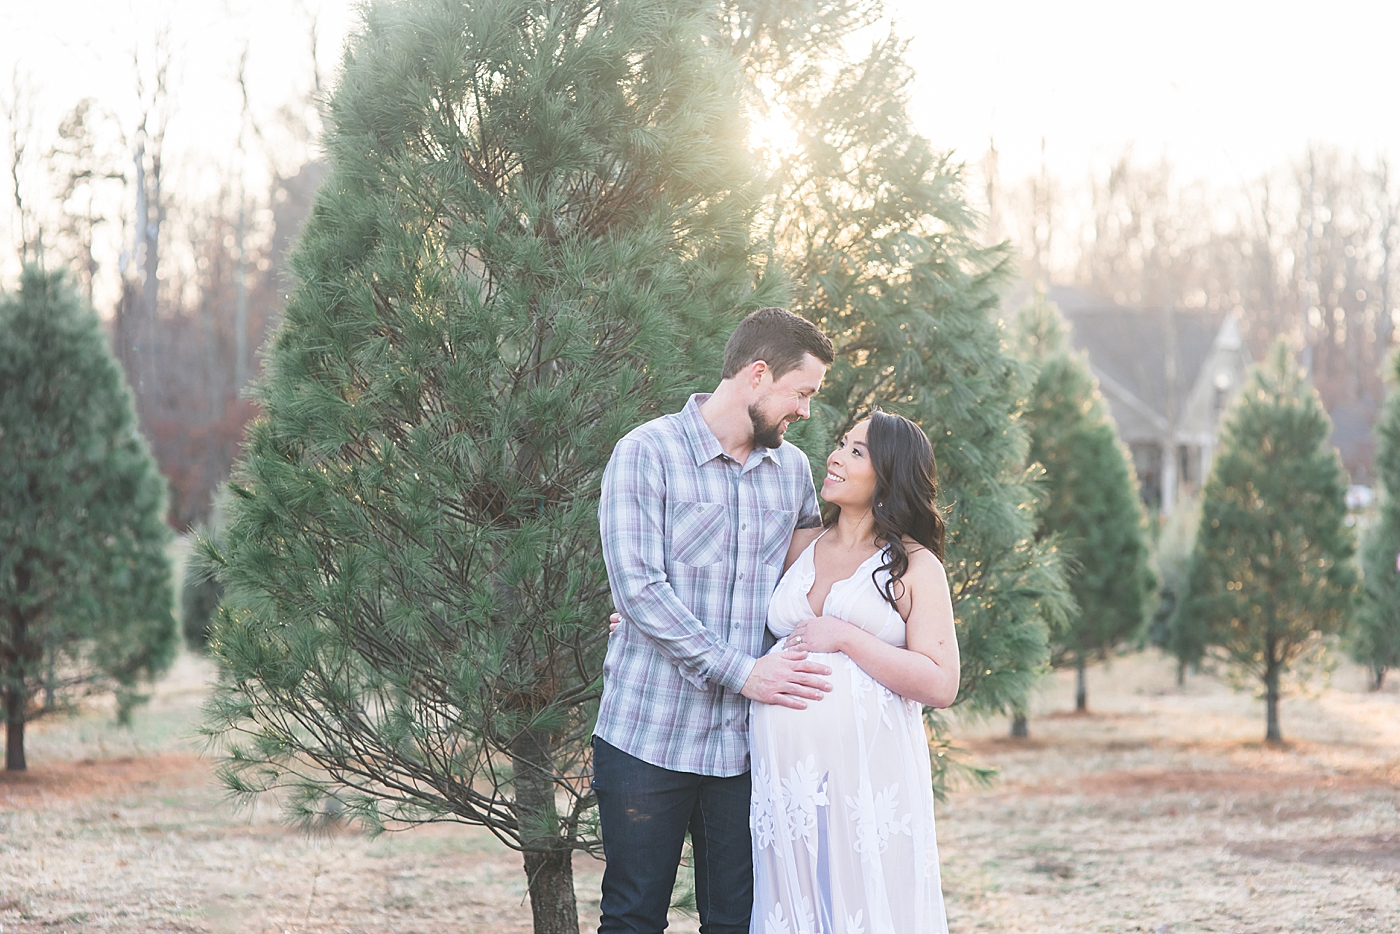 Mom and dad to be at a tree farm | Photo by Anna Wisjo Photography